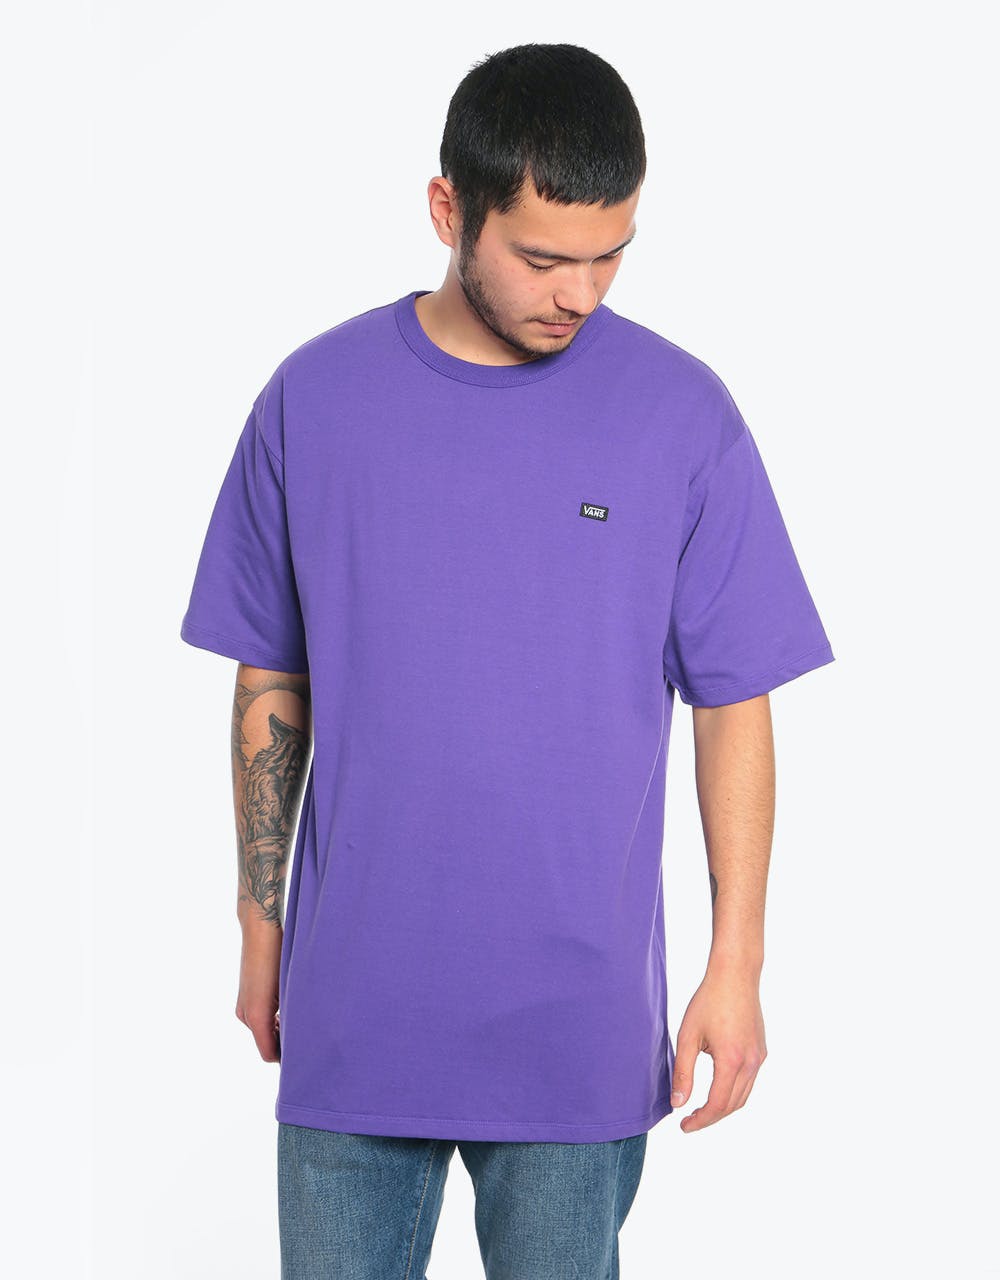 Vans Off The Wall Classic T-Shirt - Heliotrope